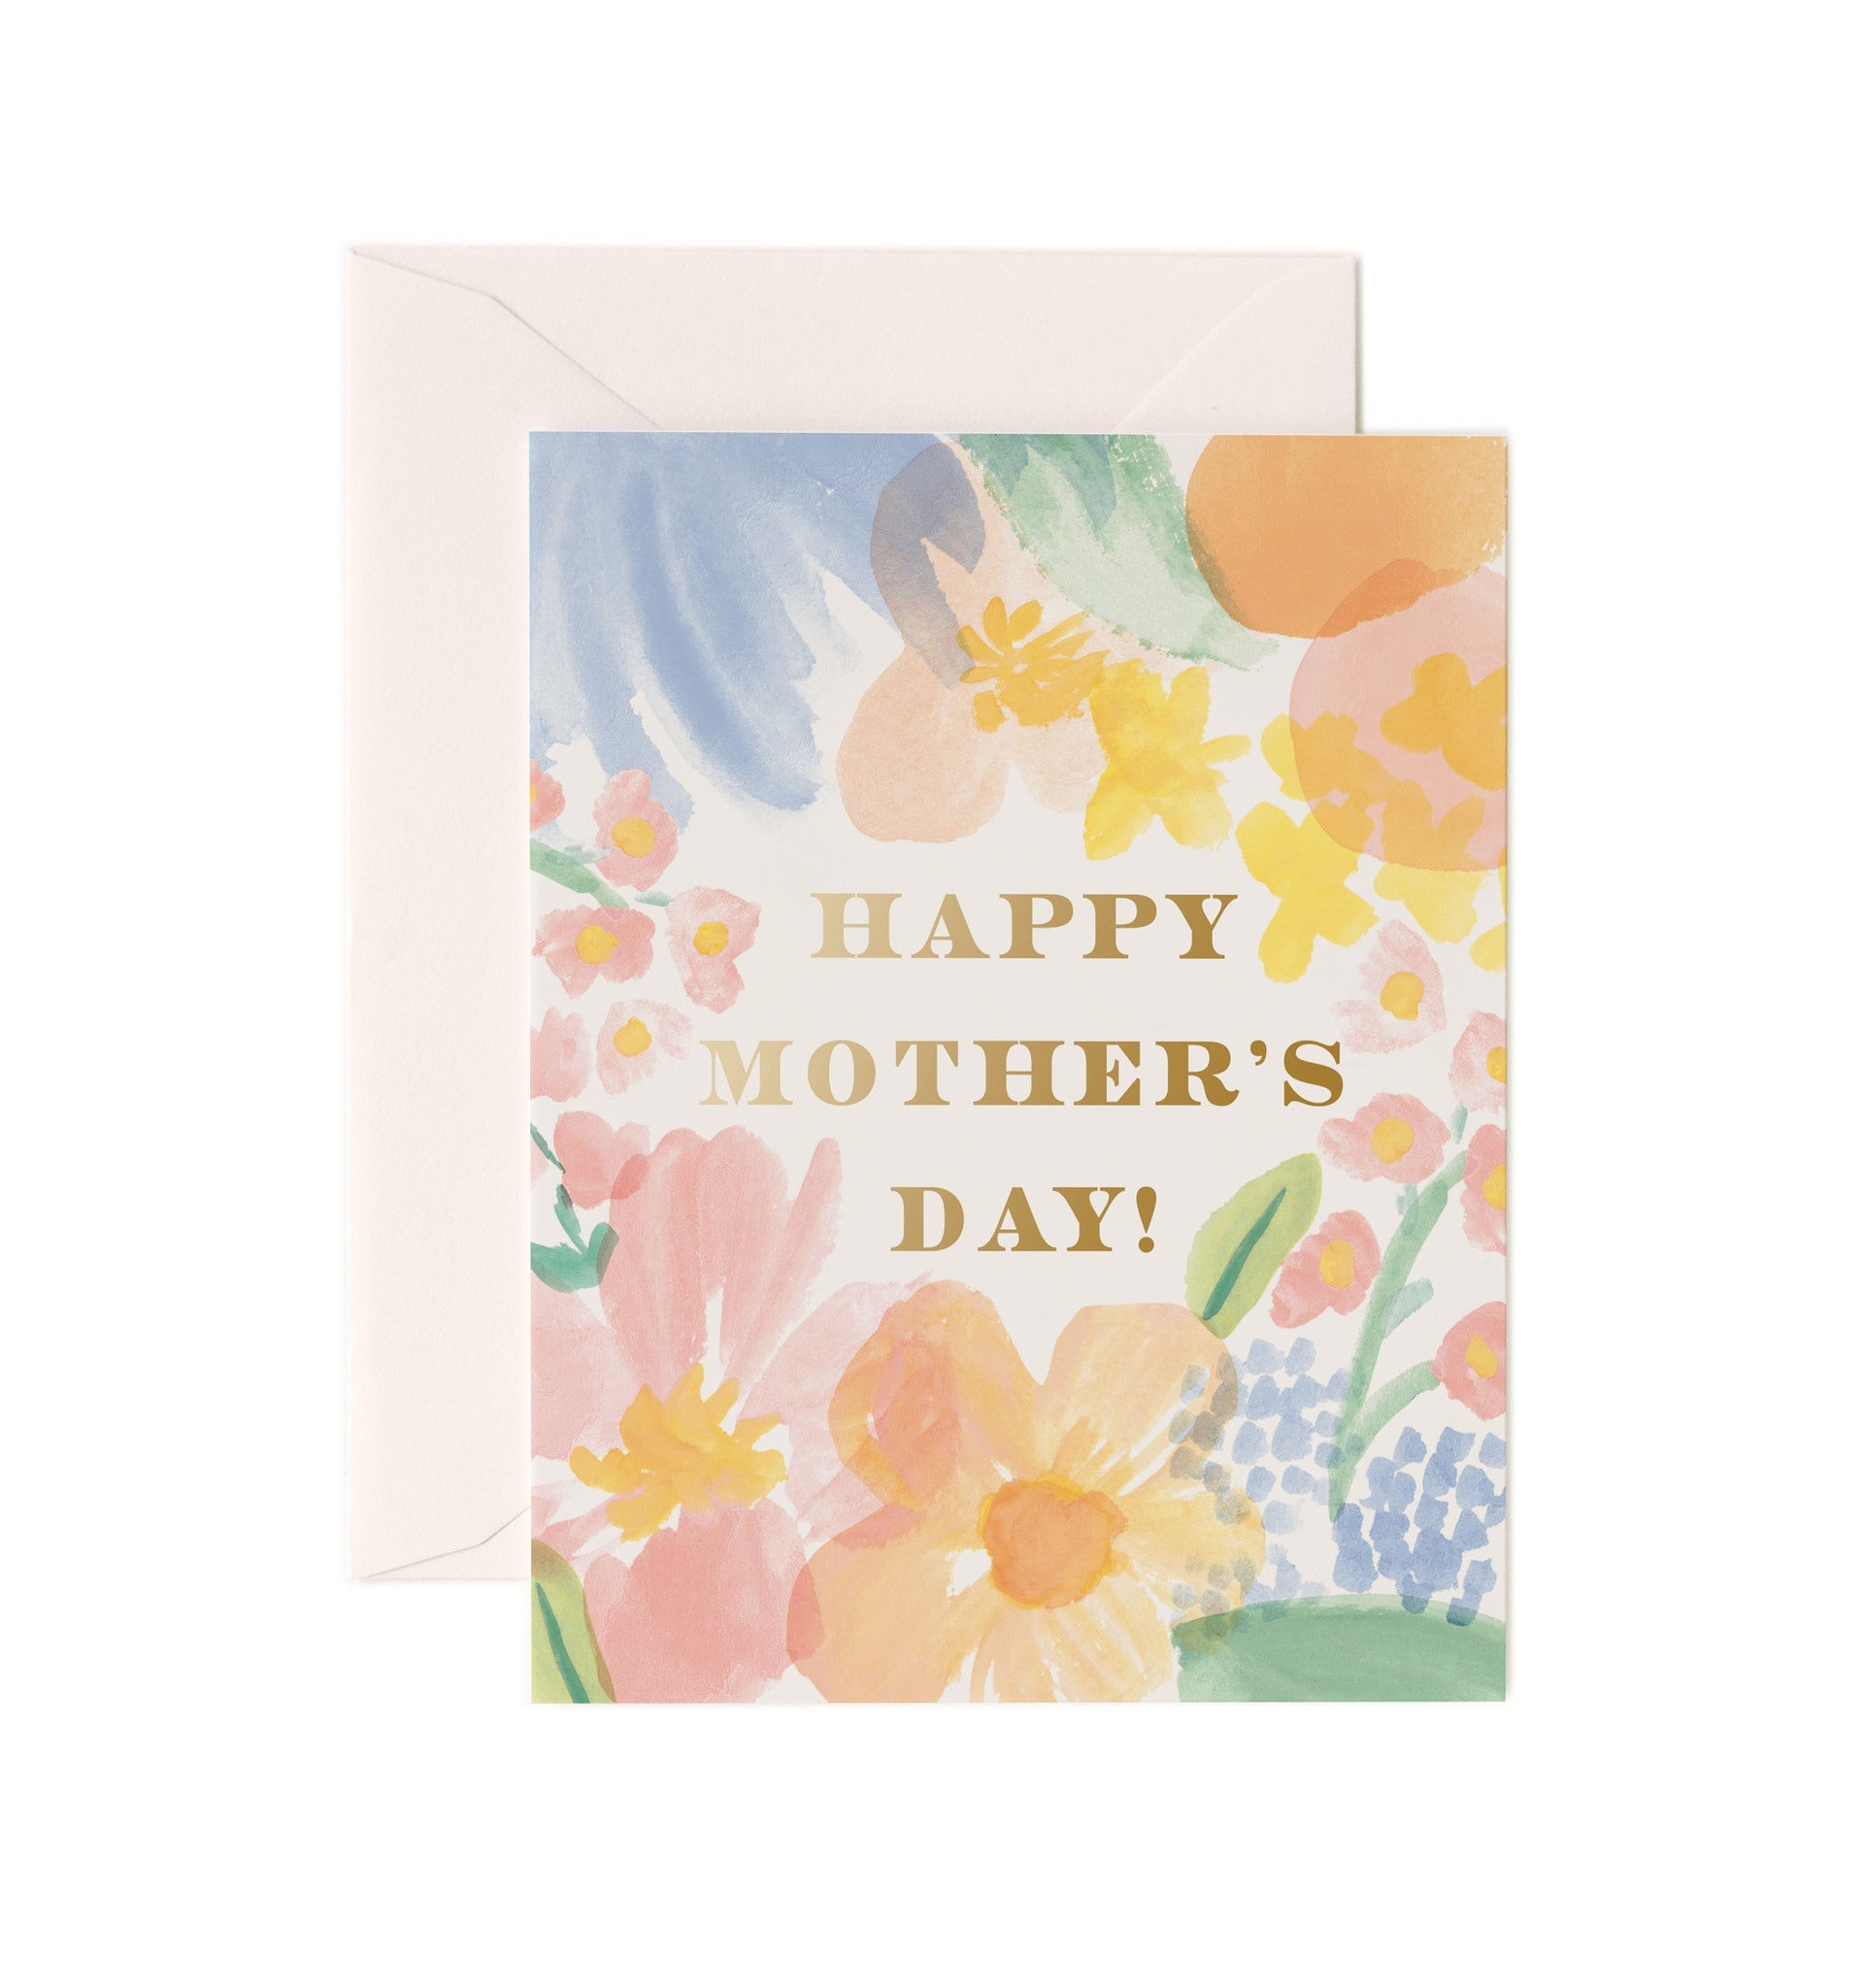 Gemma Floral "Happy Mother's Day!" Card